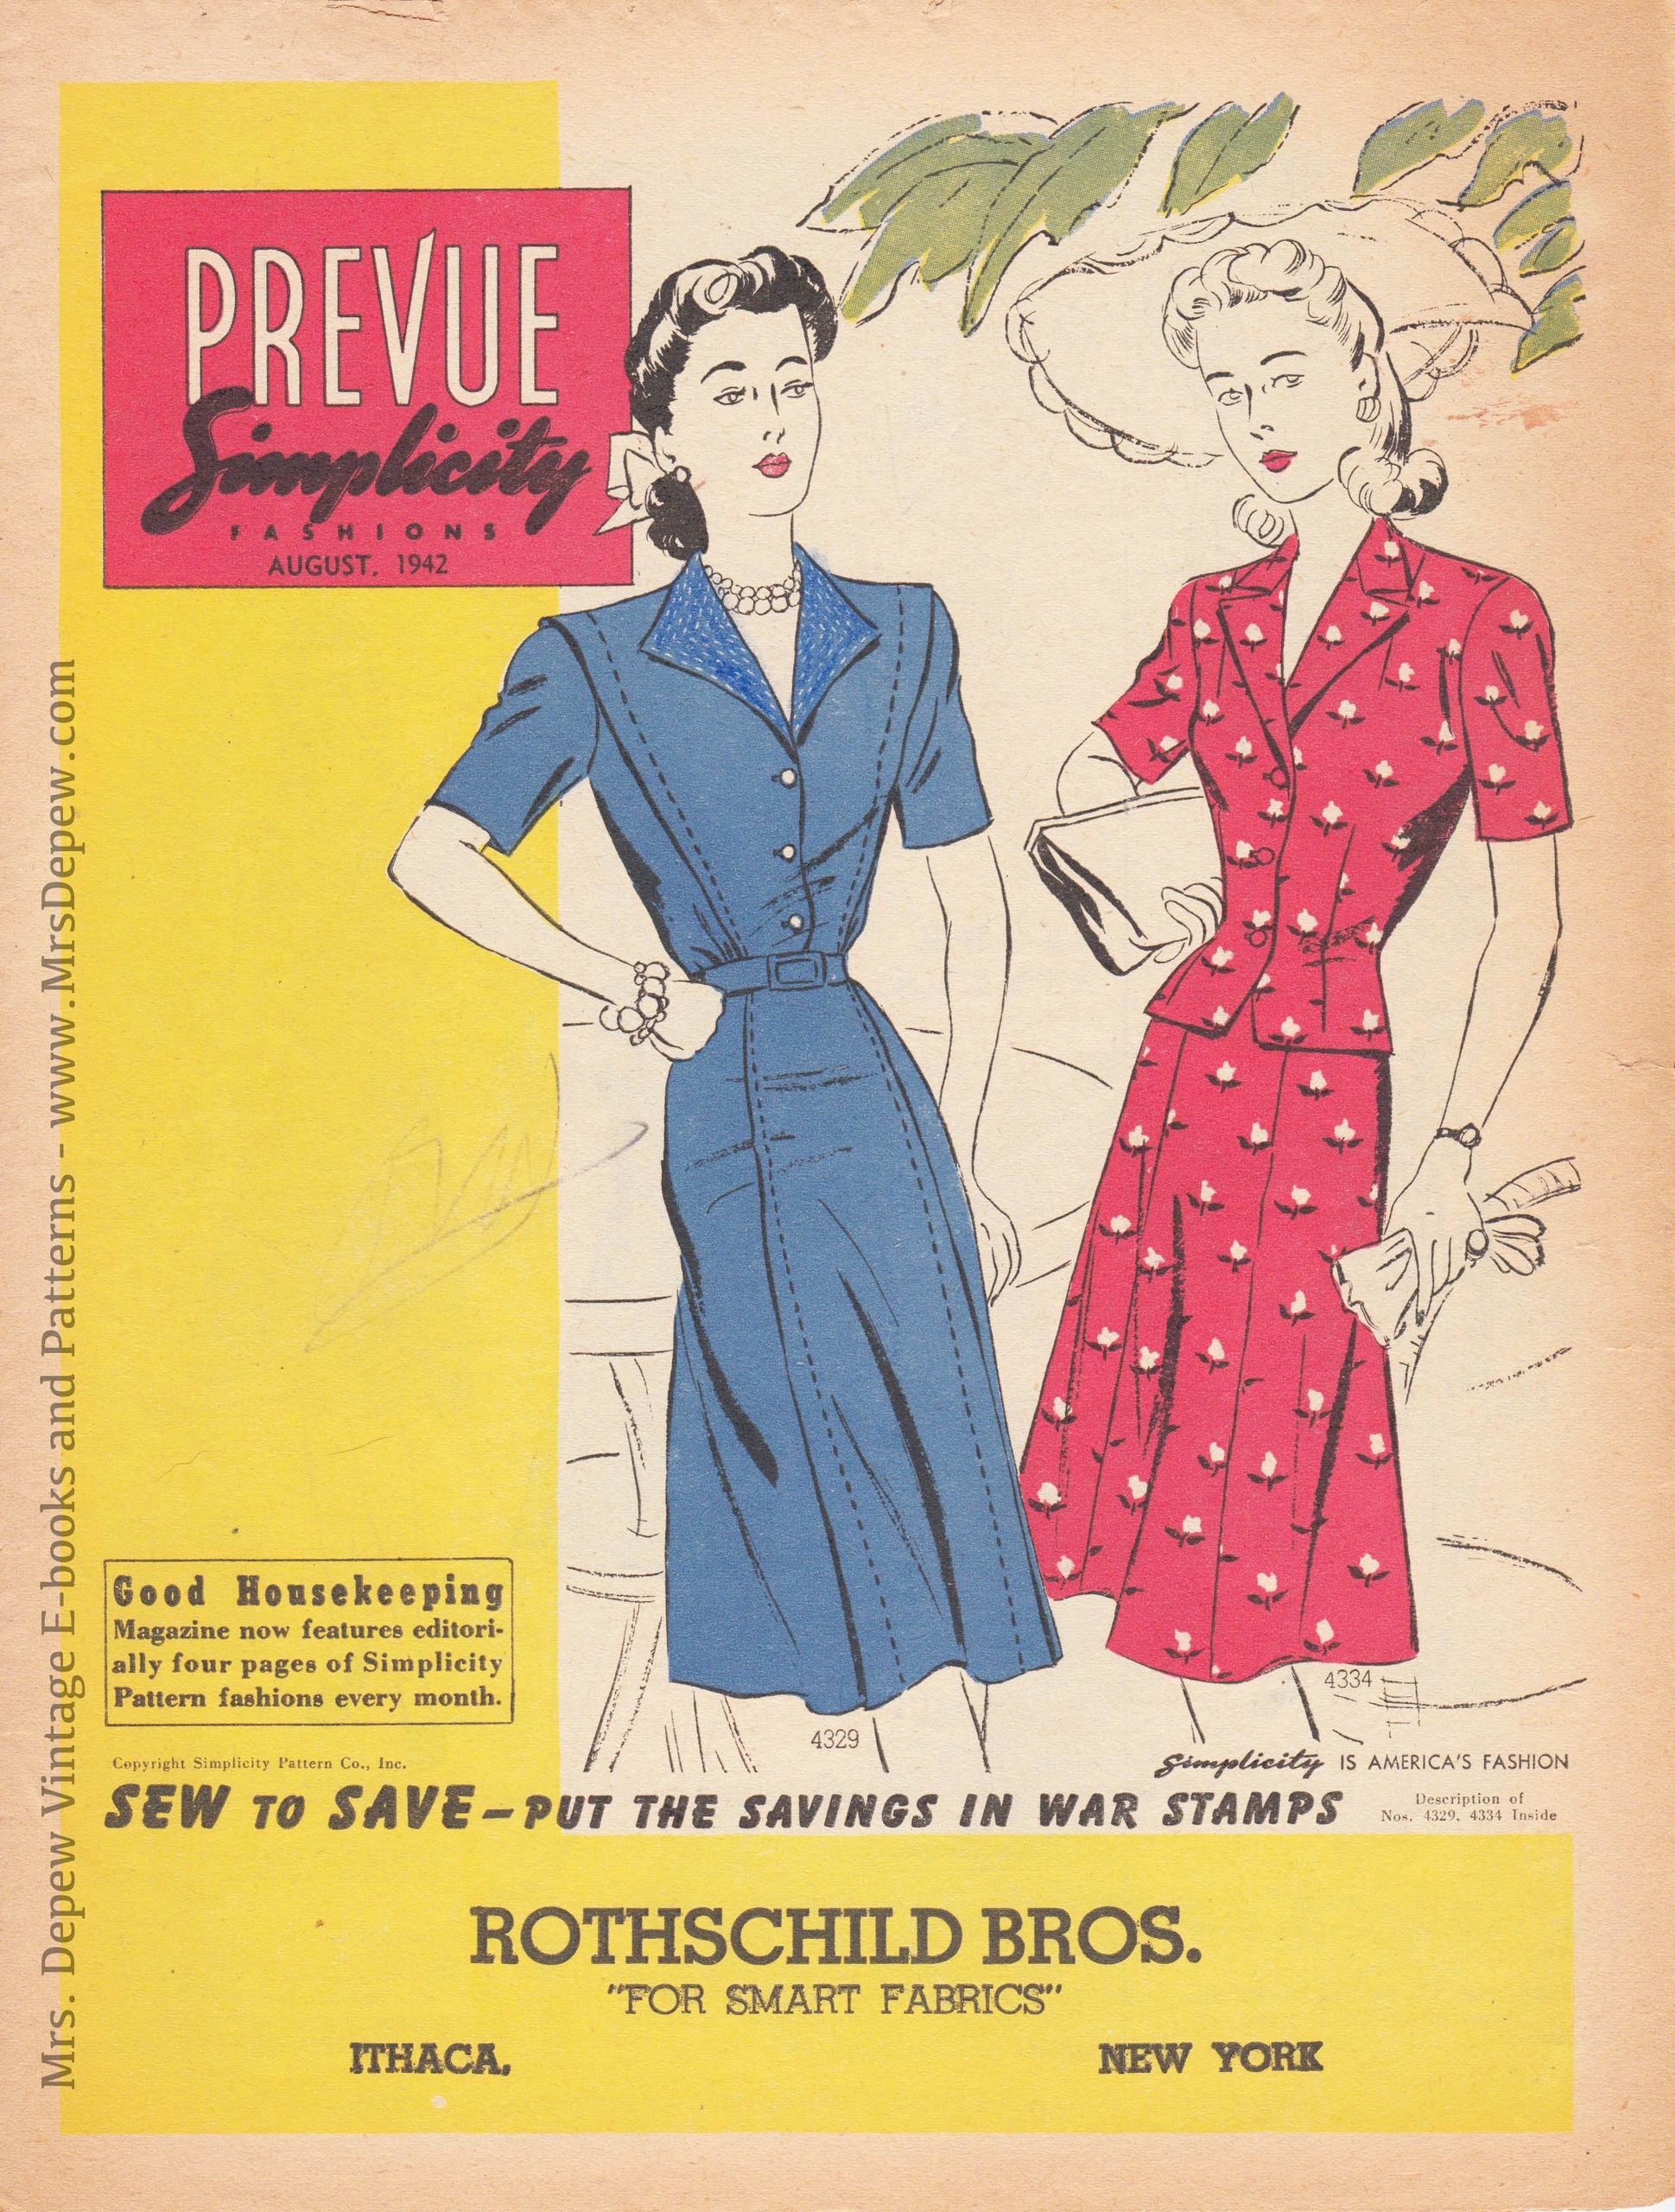 Vintage 1940s Fashion Dos and Don'ts for the Plump Girl Fashion